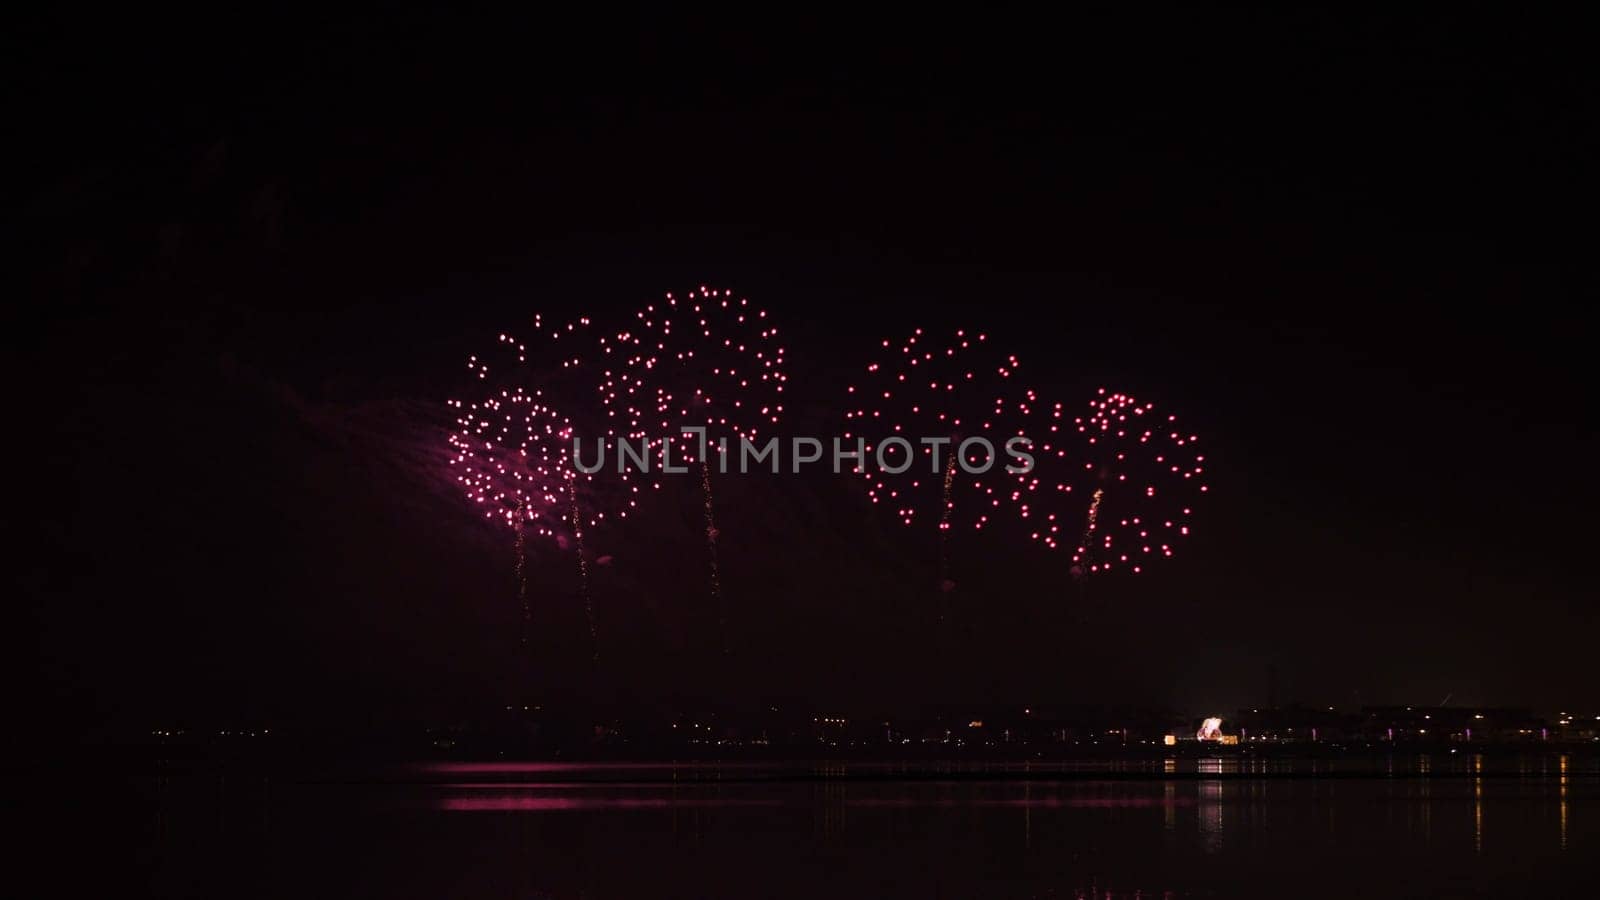 Fireworks of St Paio of Torreira by homydesign